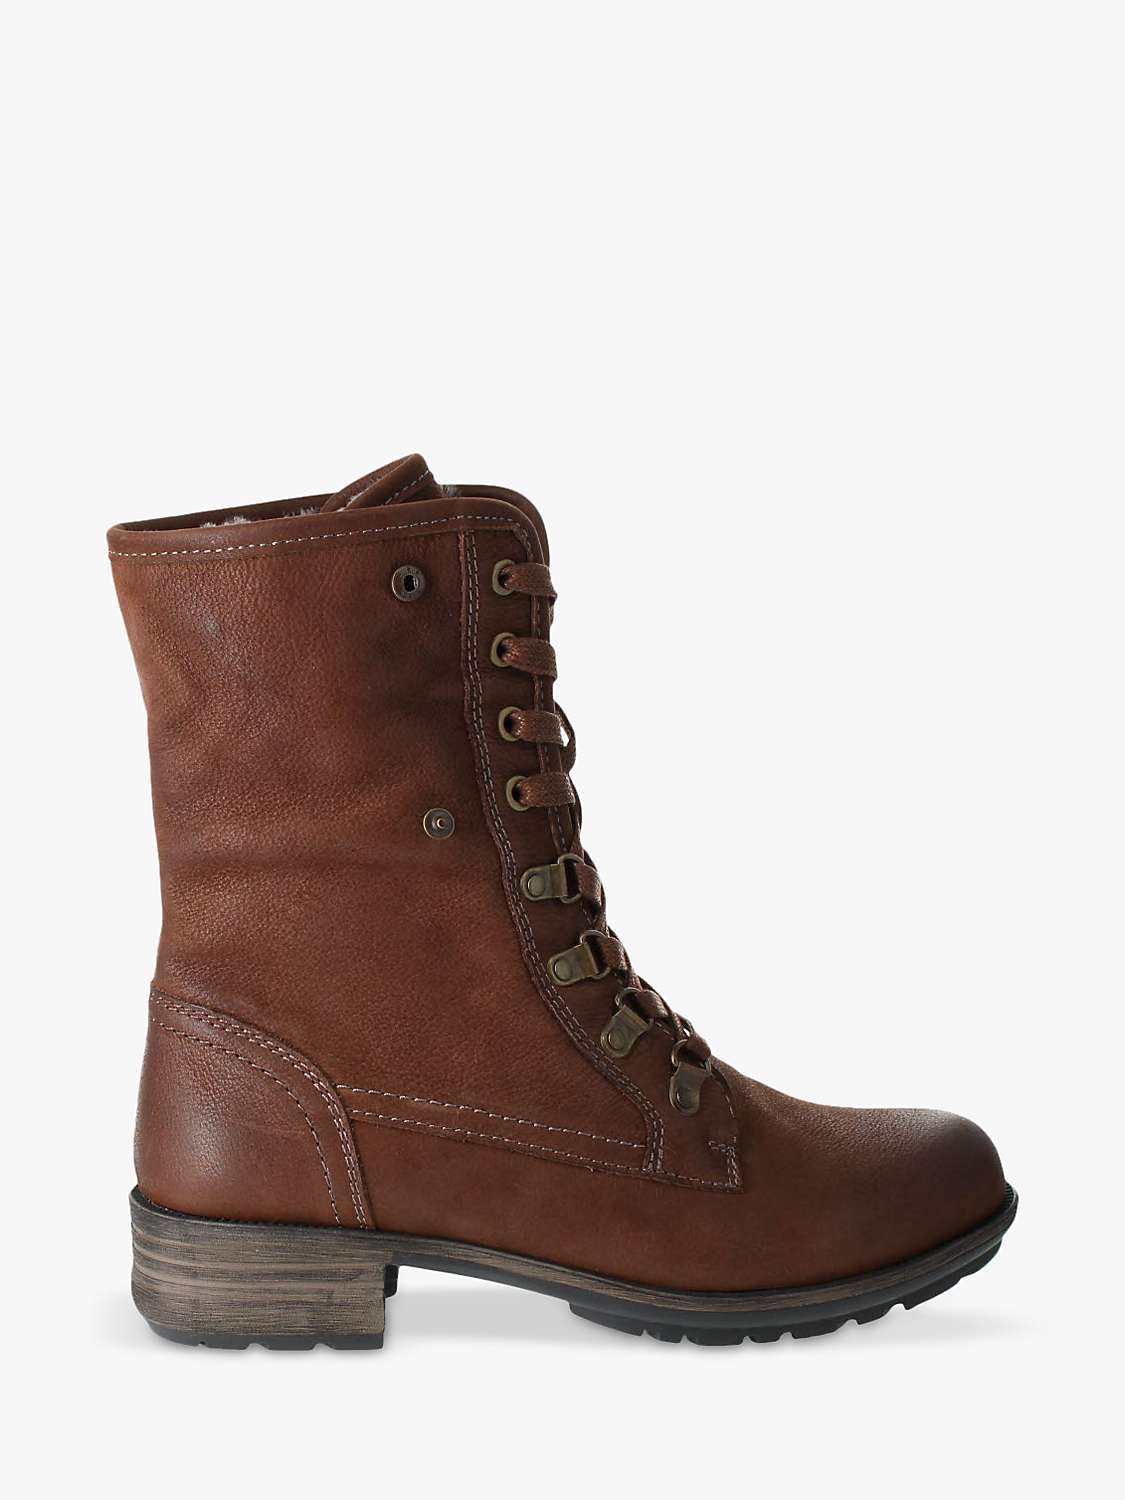 Josef Seibel Susie 04 Ankle Boots, Brown at John Lewis & Partners